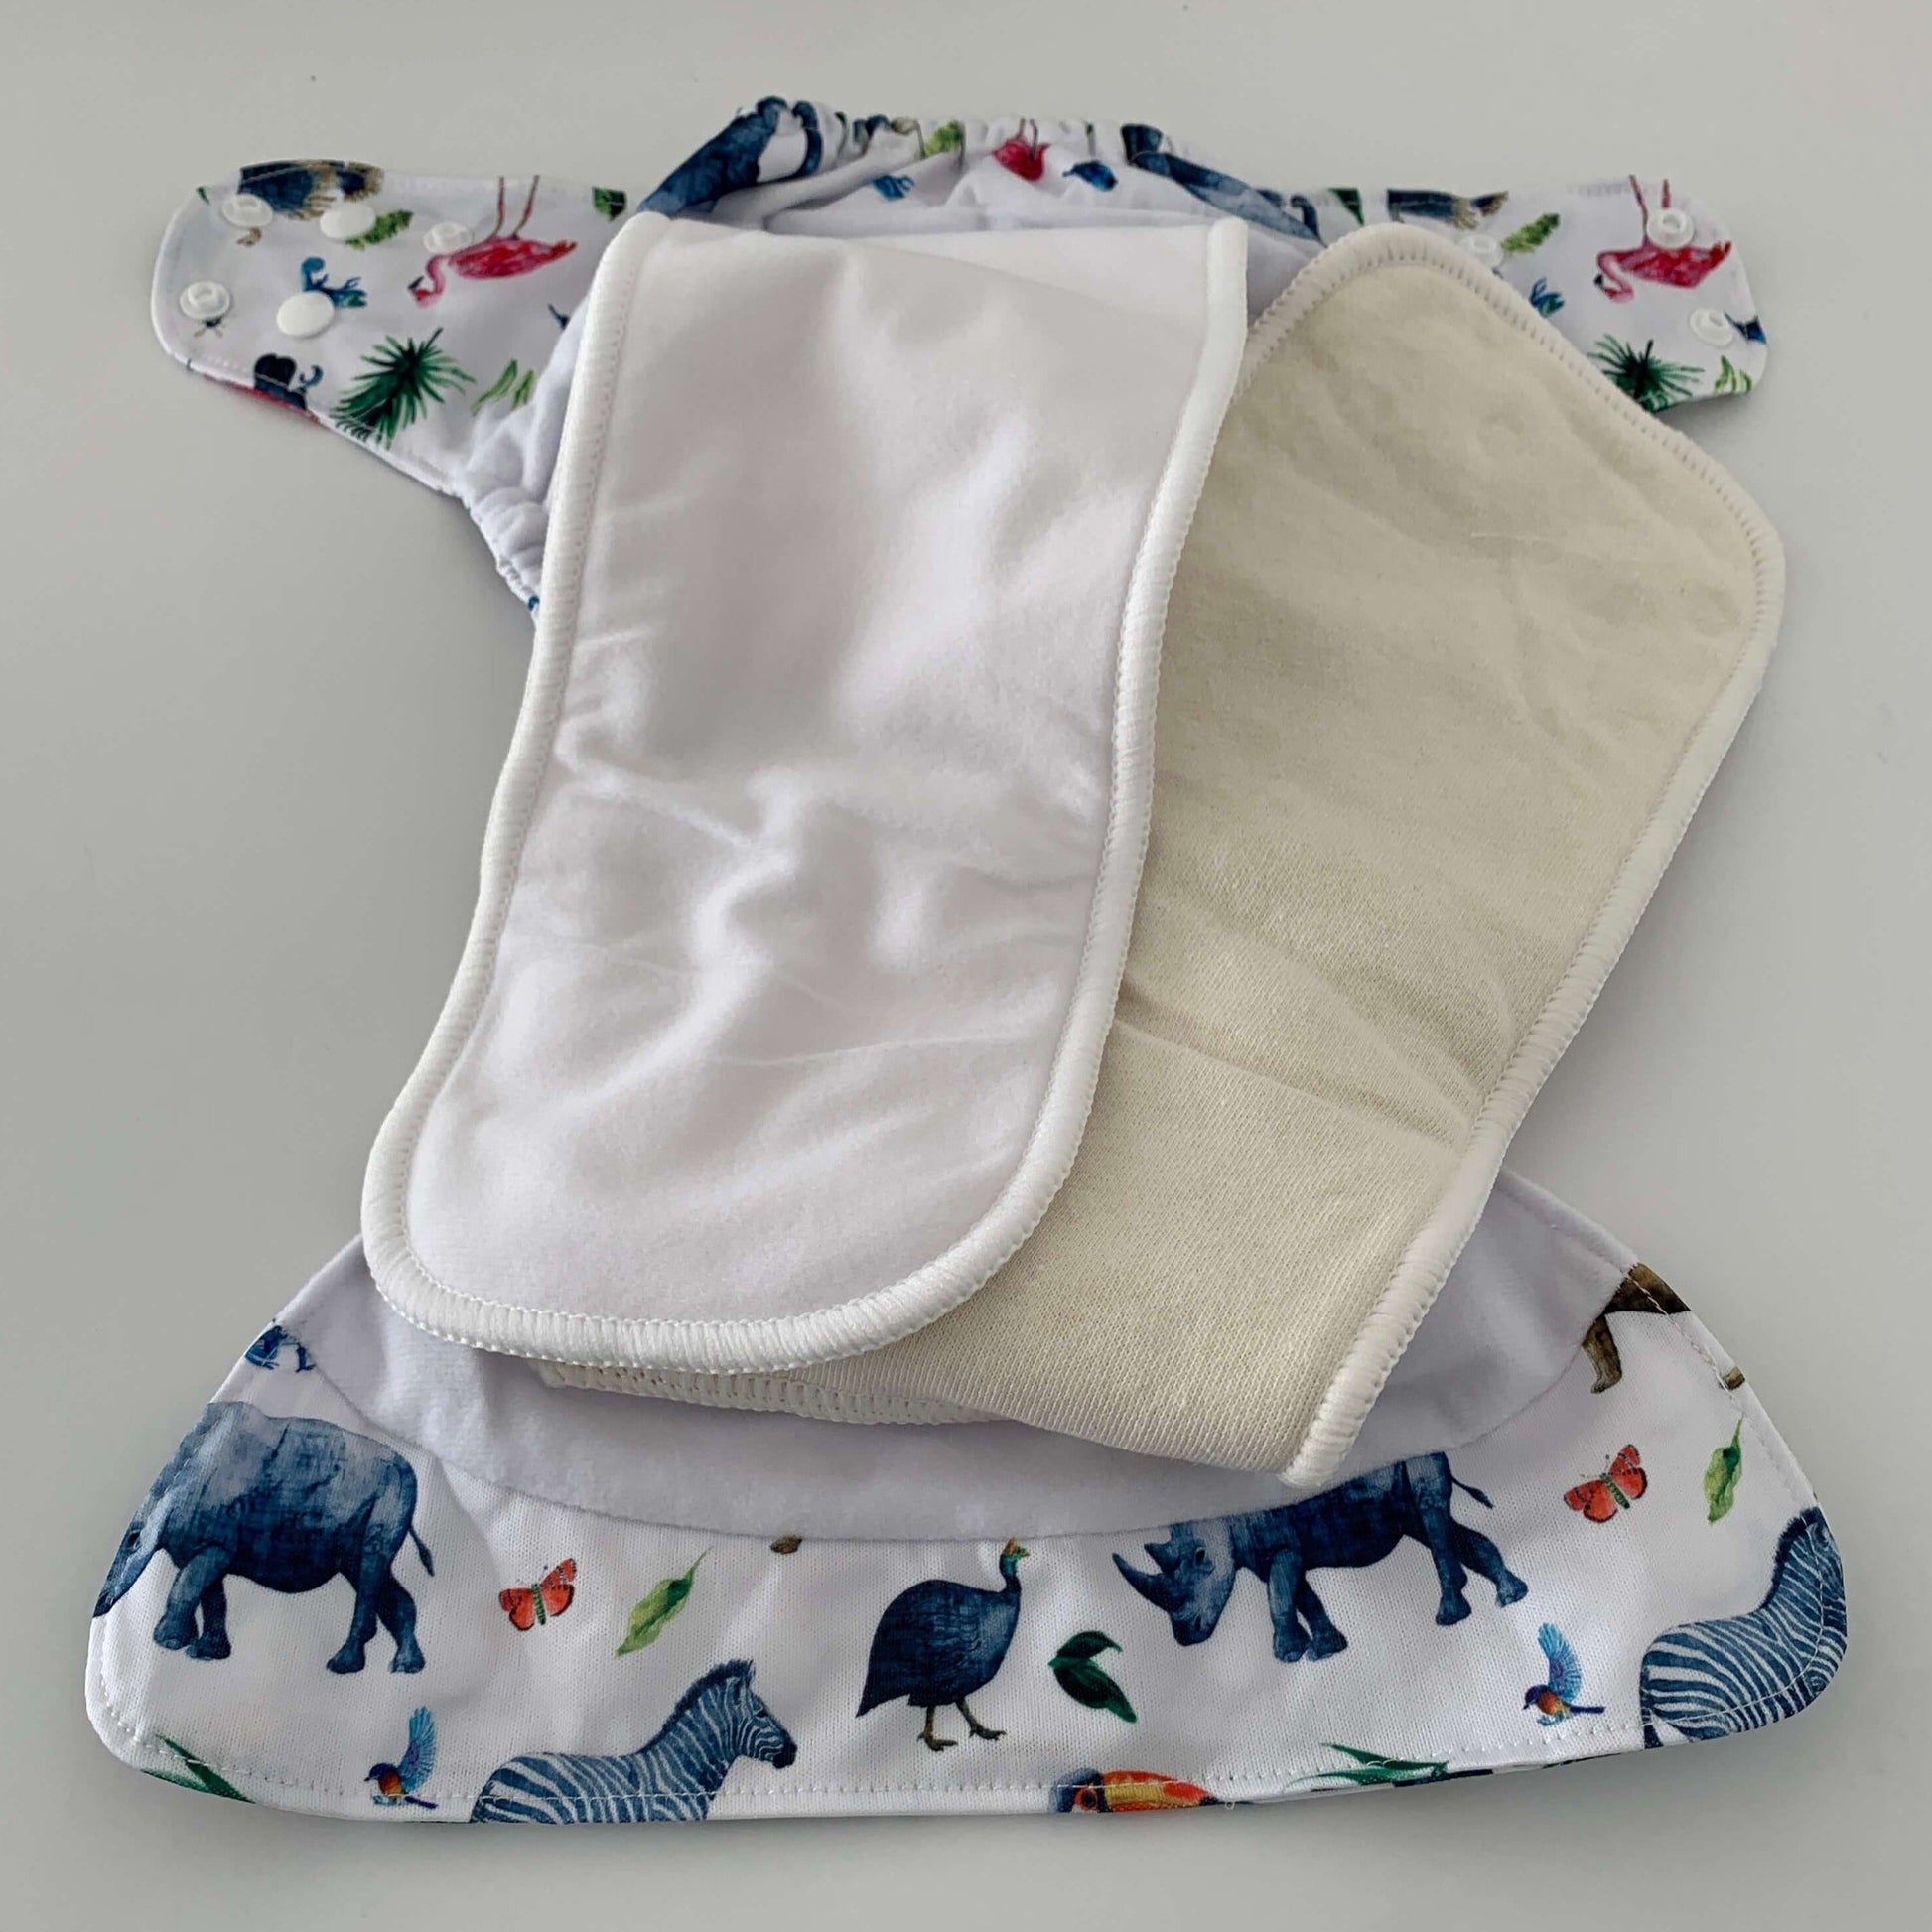 Bear & Moo Reusable Cloth Nappy in Emergency Village print | Luxe